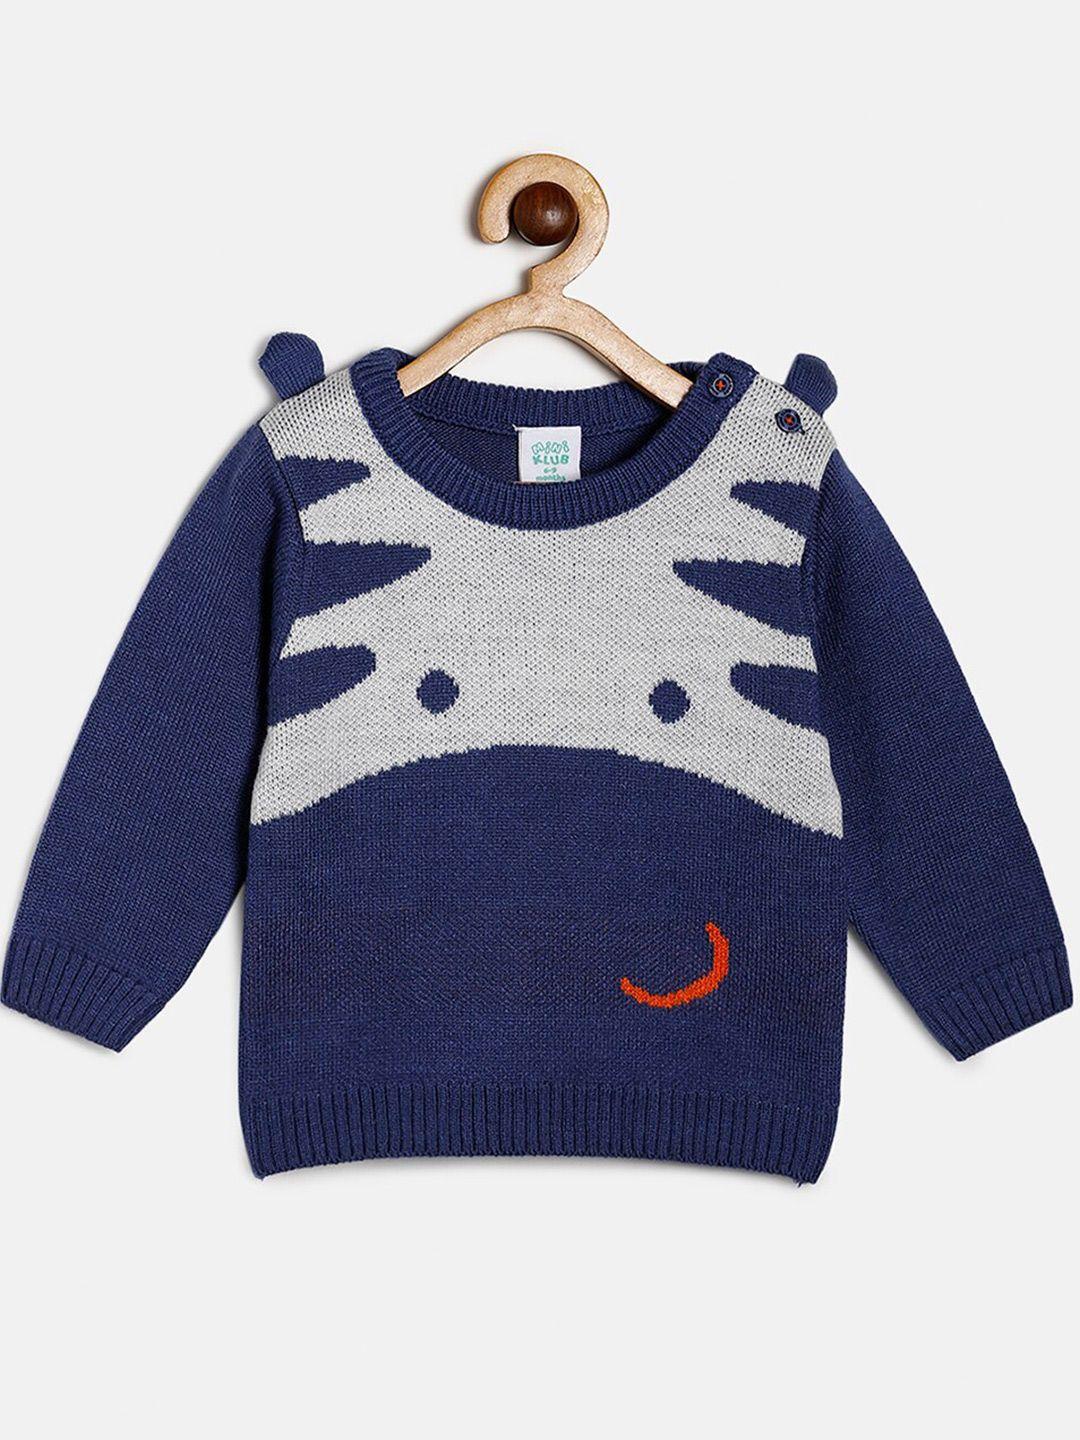 mini klub boys navy blue & grey pullover with embroidered detail